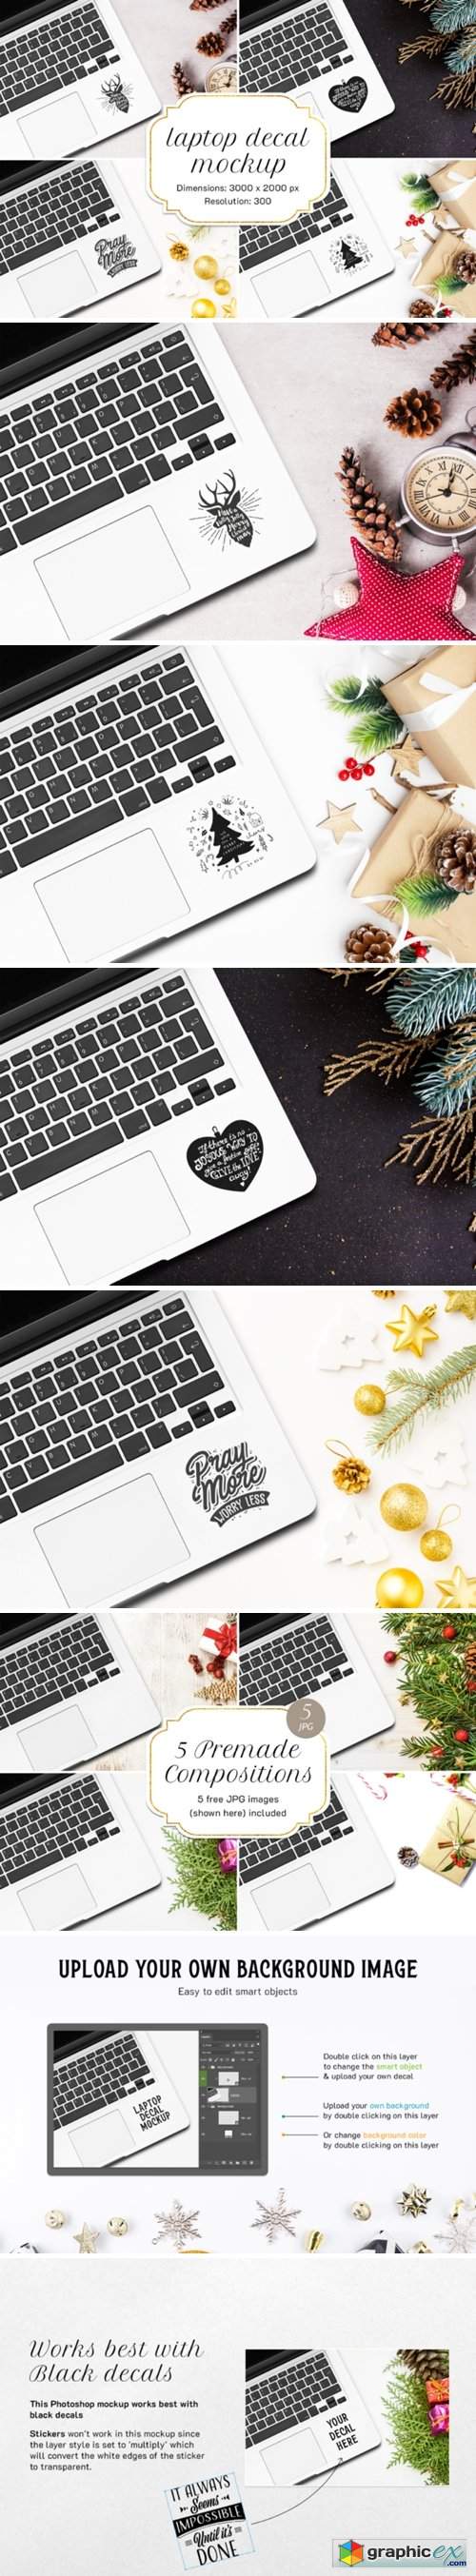 Download Laptop Decal Mockup 1 Psd File Free Download Vector Stock Image Photoshop Icon